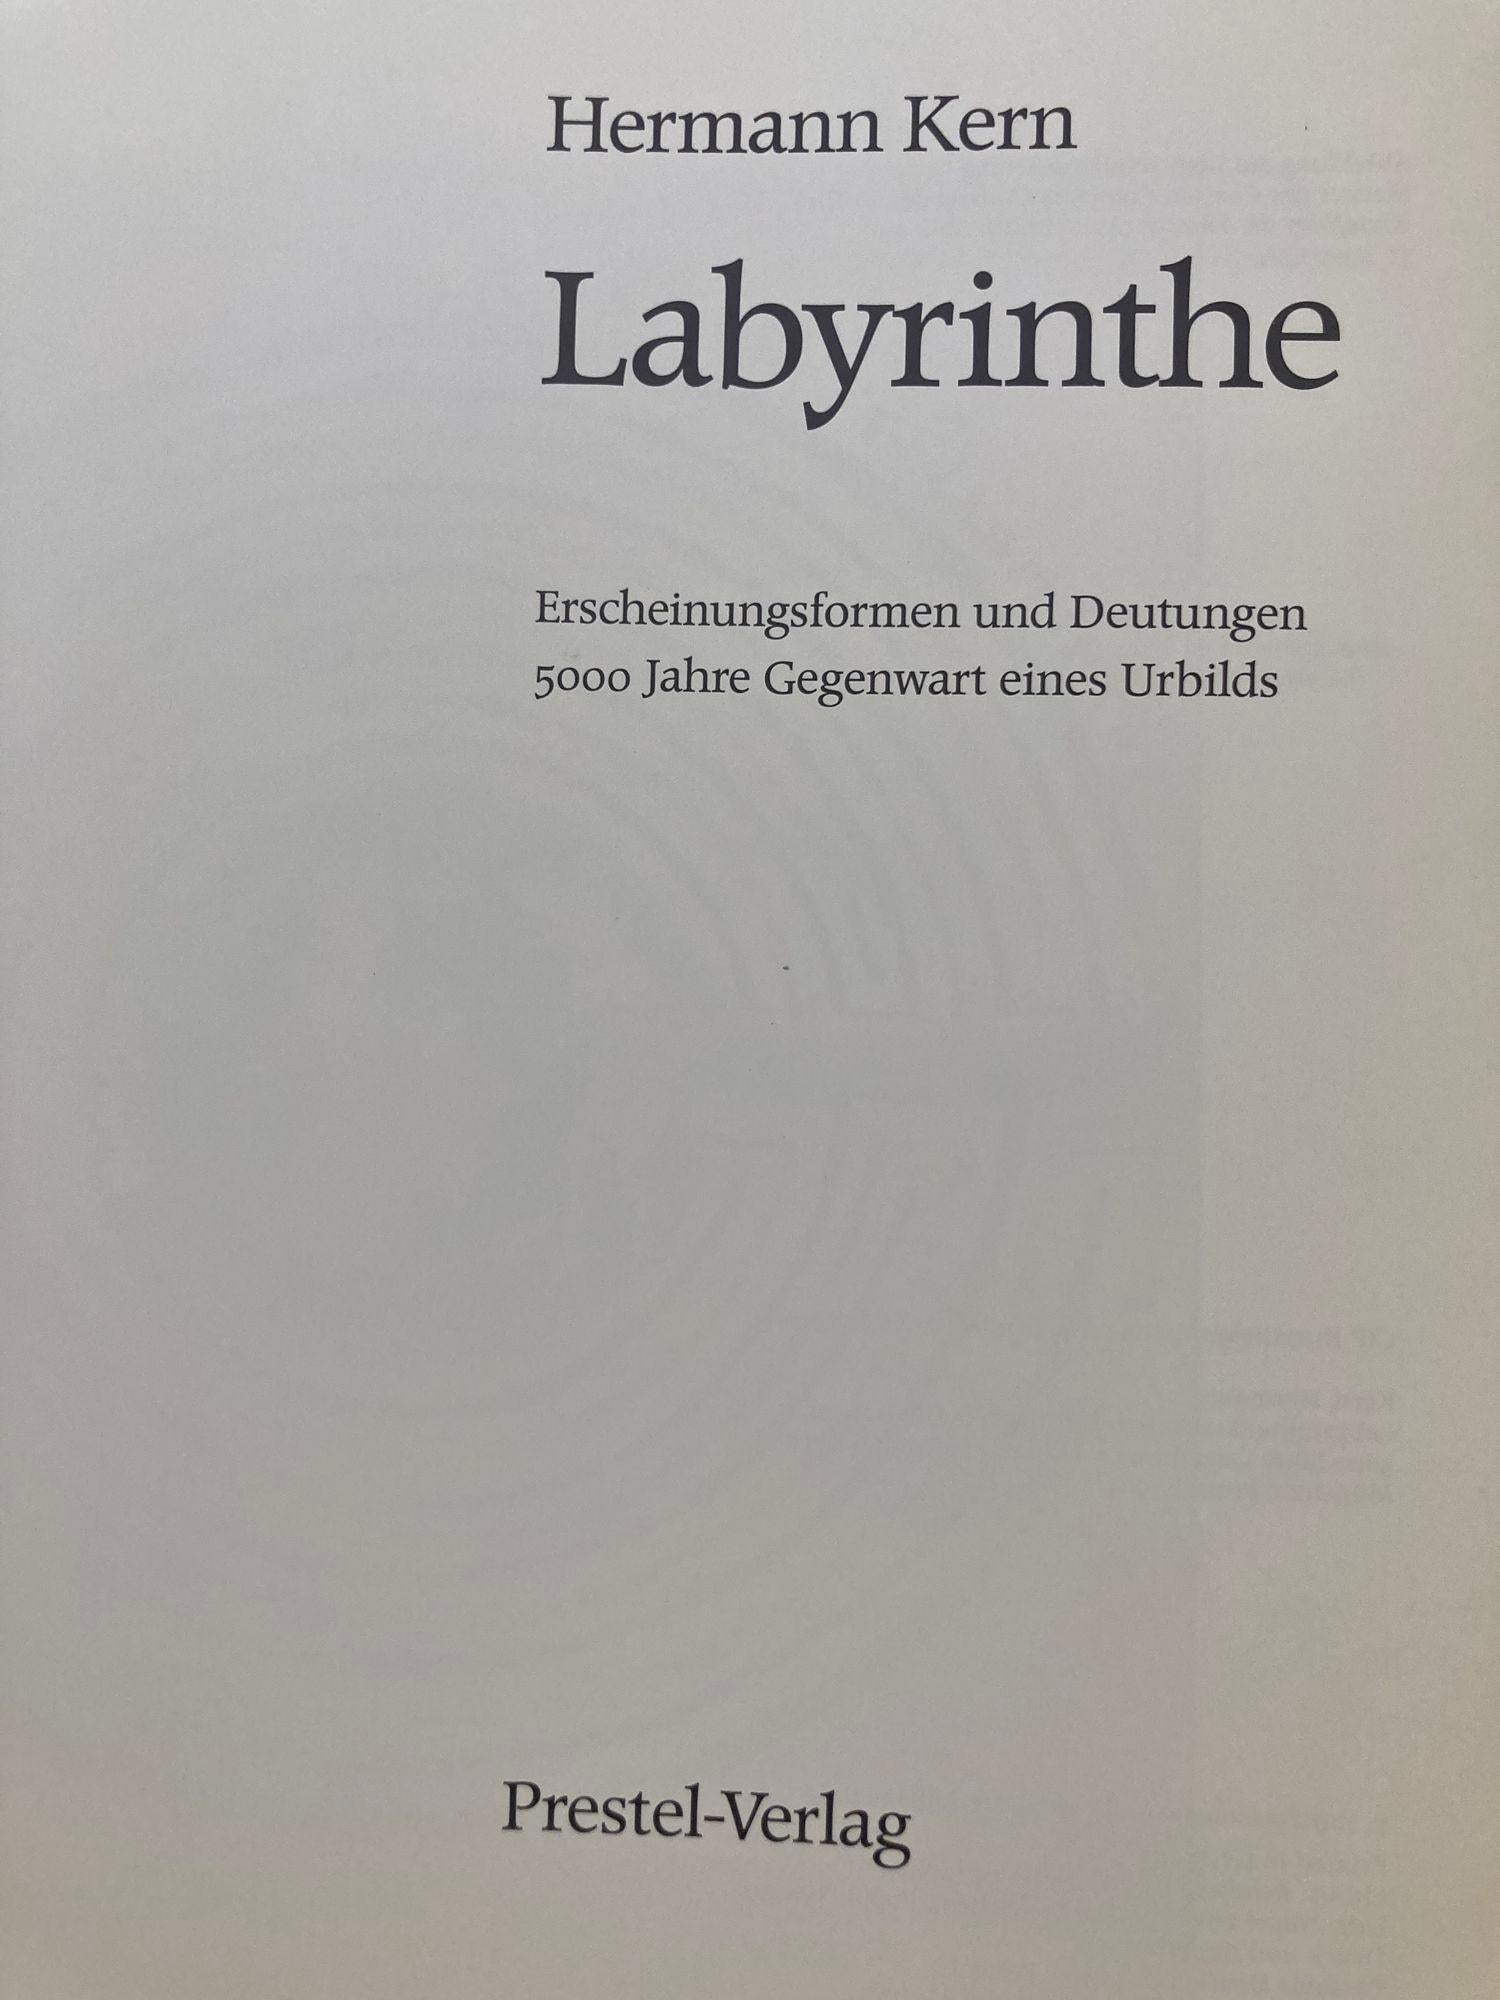 Paper Labyrinthe by Herman Kern German Language 1st Edition 1983 Hardcover Book For Sale